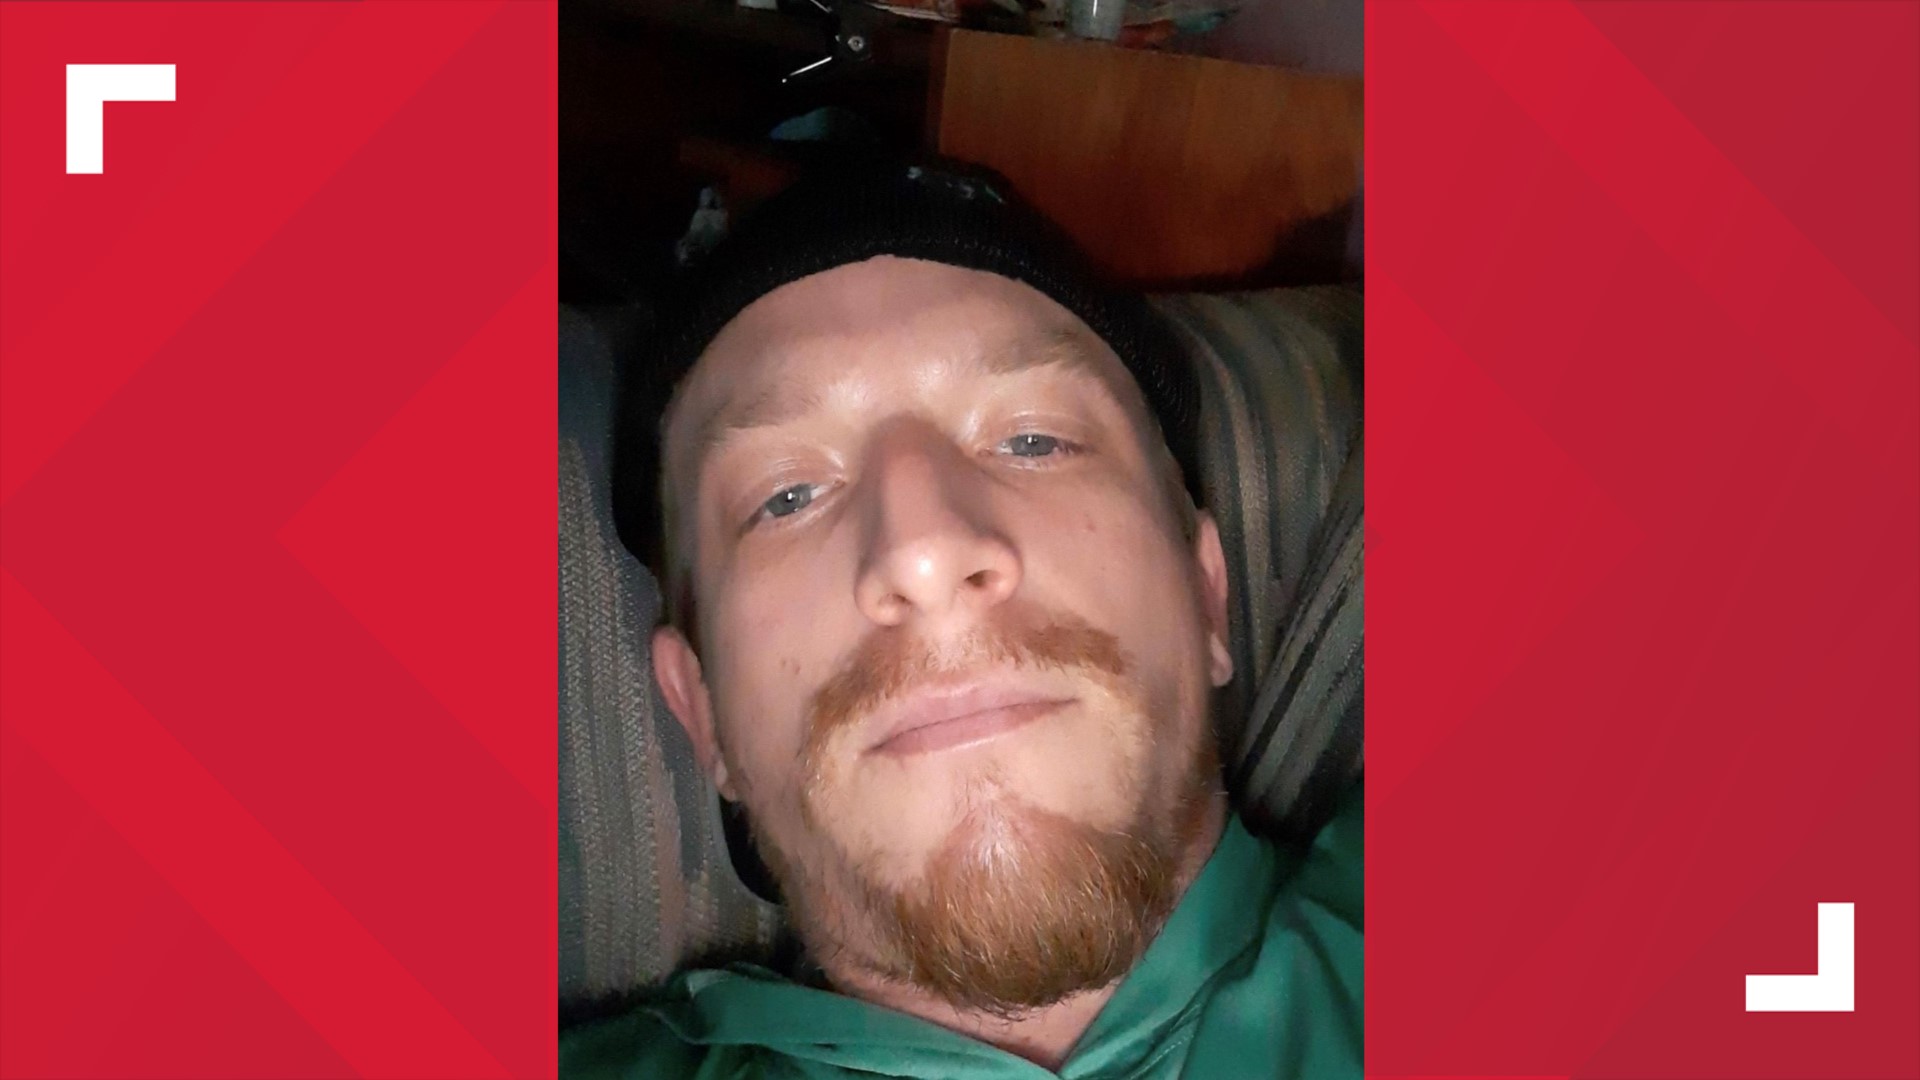 Have you seen him? Tangipahoa Sheriff looking for person of interest in